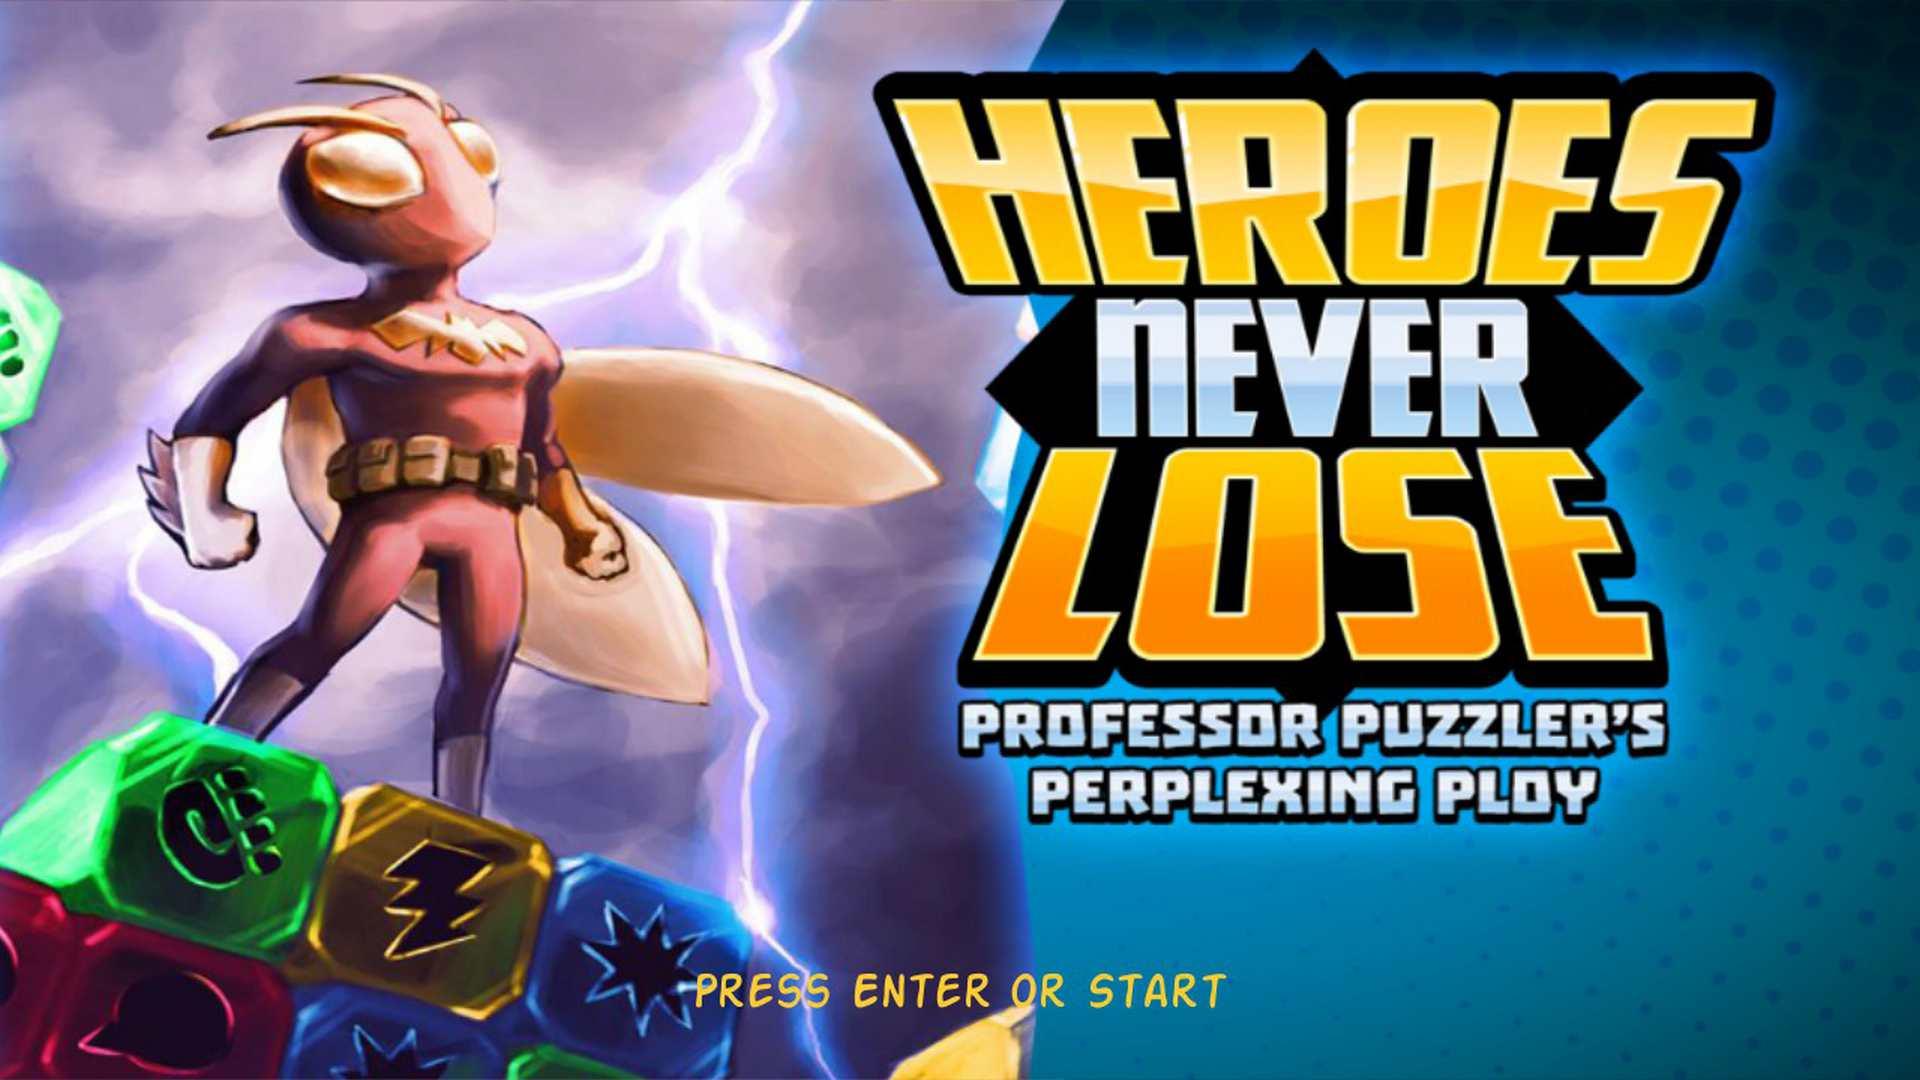 "Heroes Never Lose: Professor Puzzler's Perplexing Ploy" ra mắt phiên bản Steam Early Access